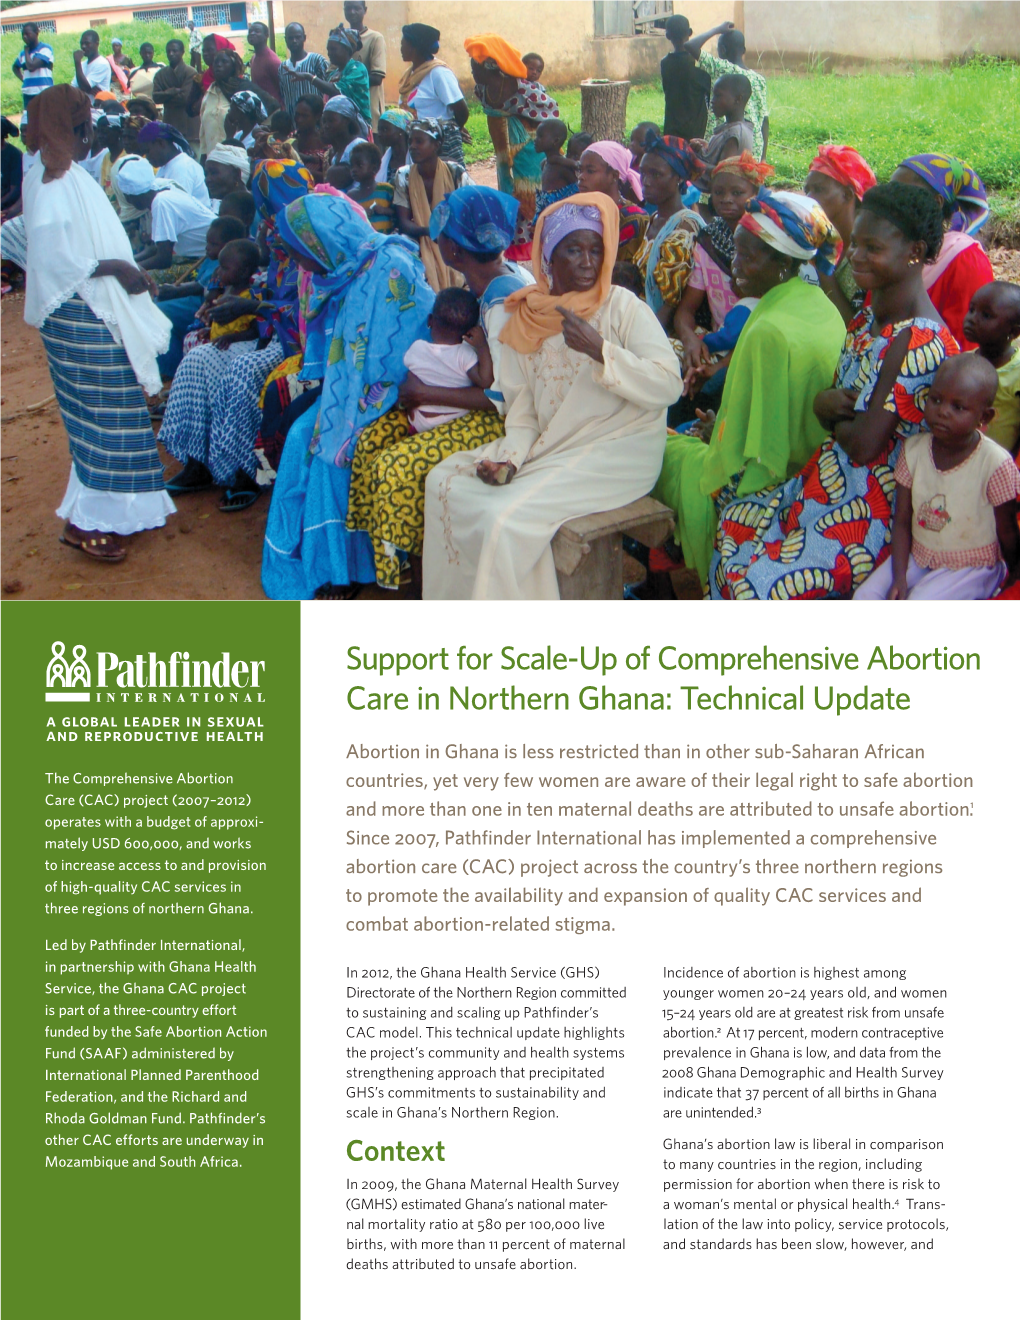 Support for Scale-Up of Comprehensive Abortion Care in Northern Ghana: Technical Update